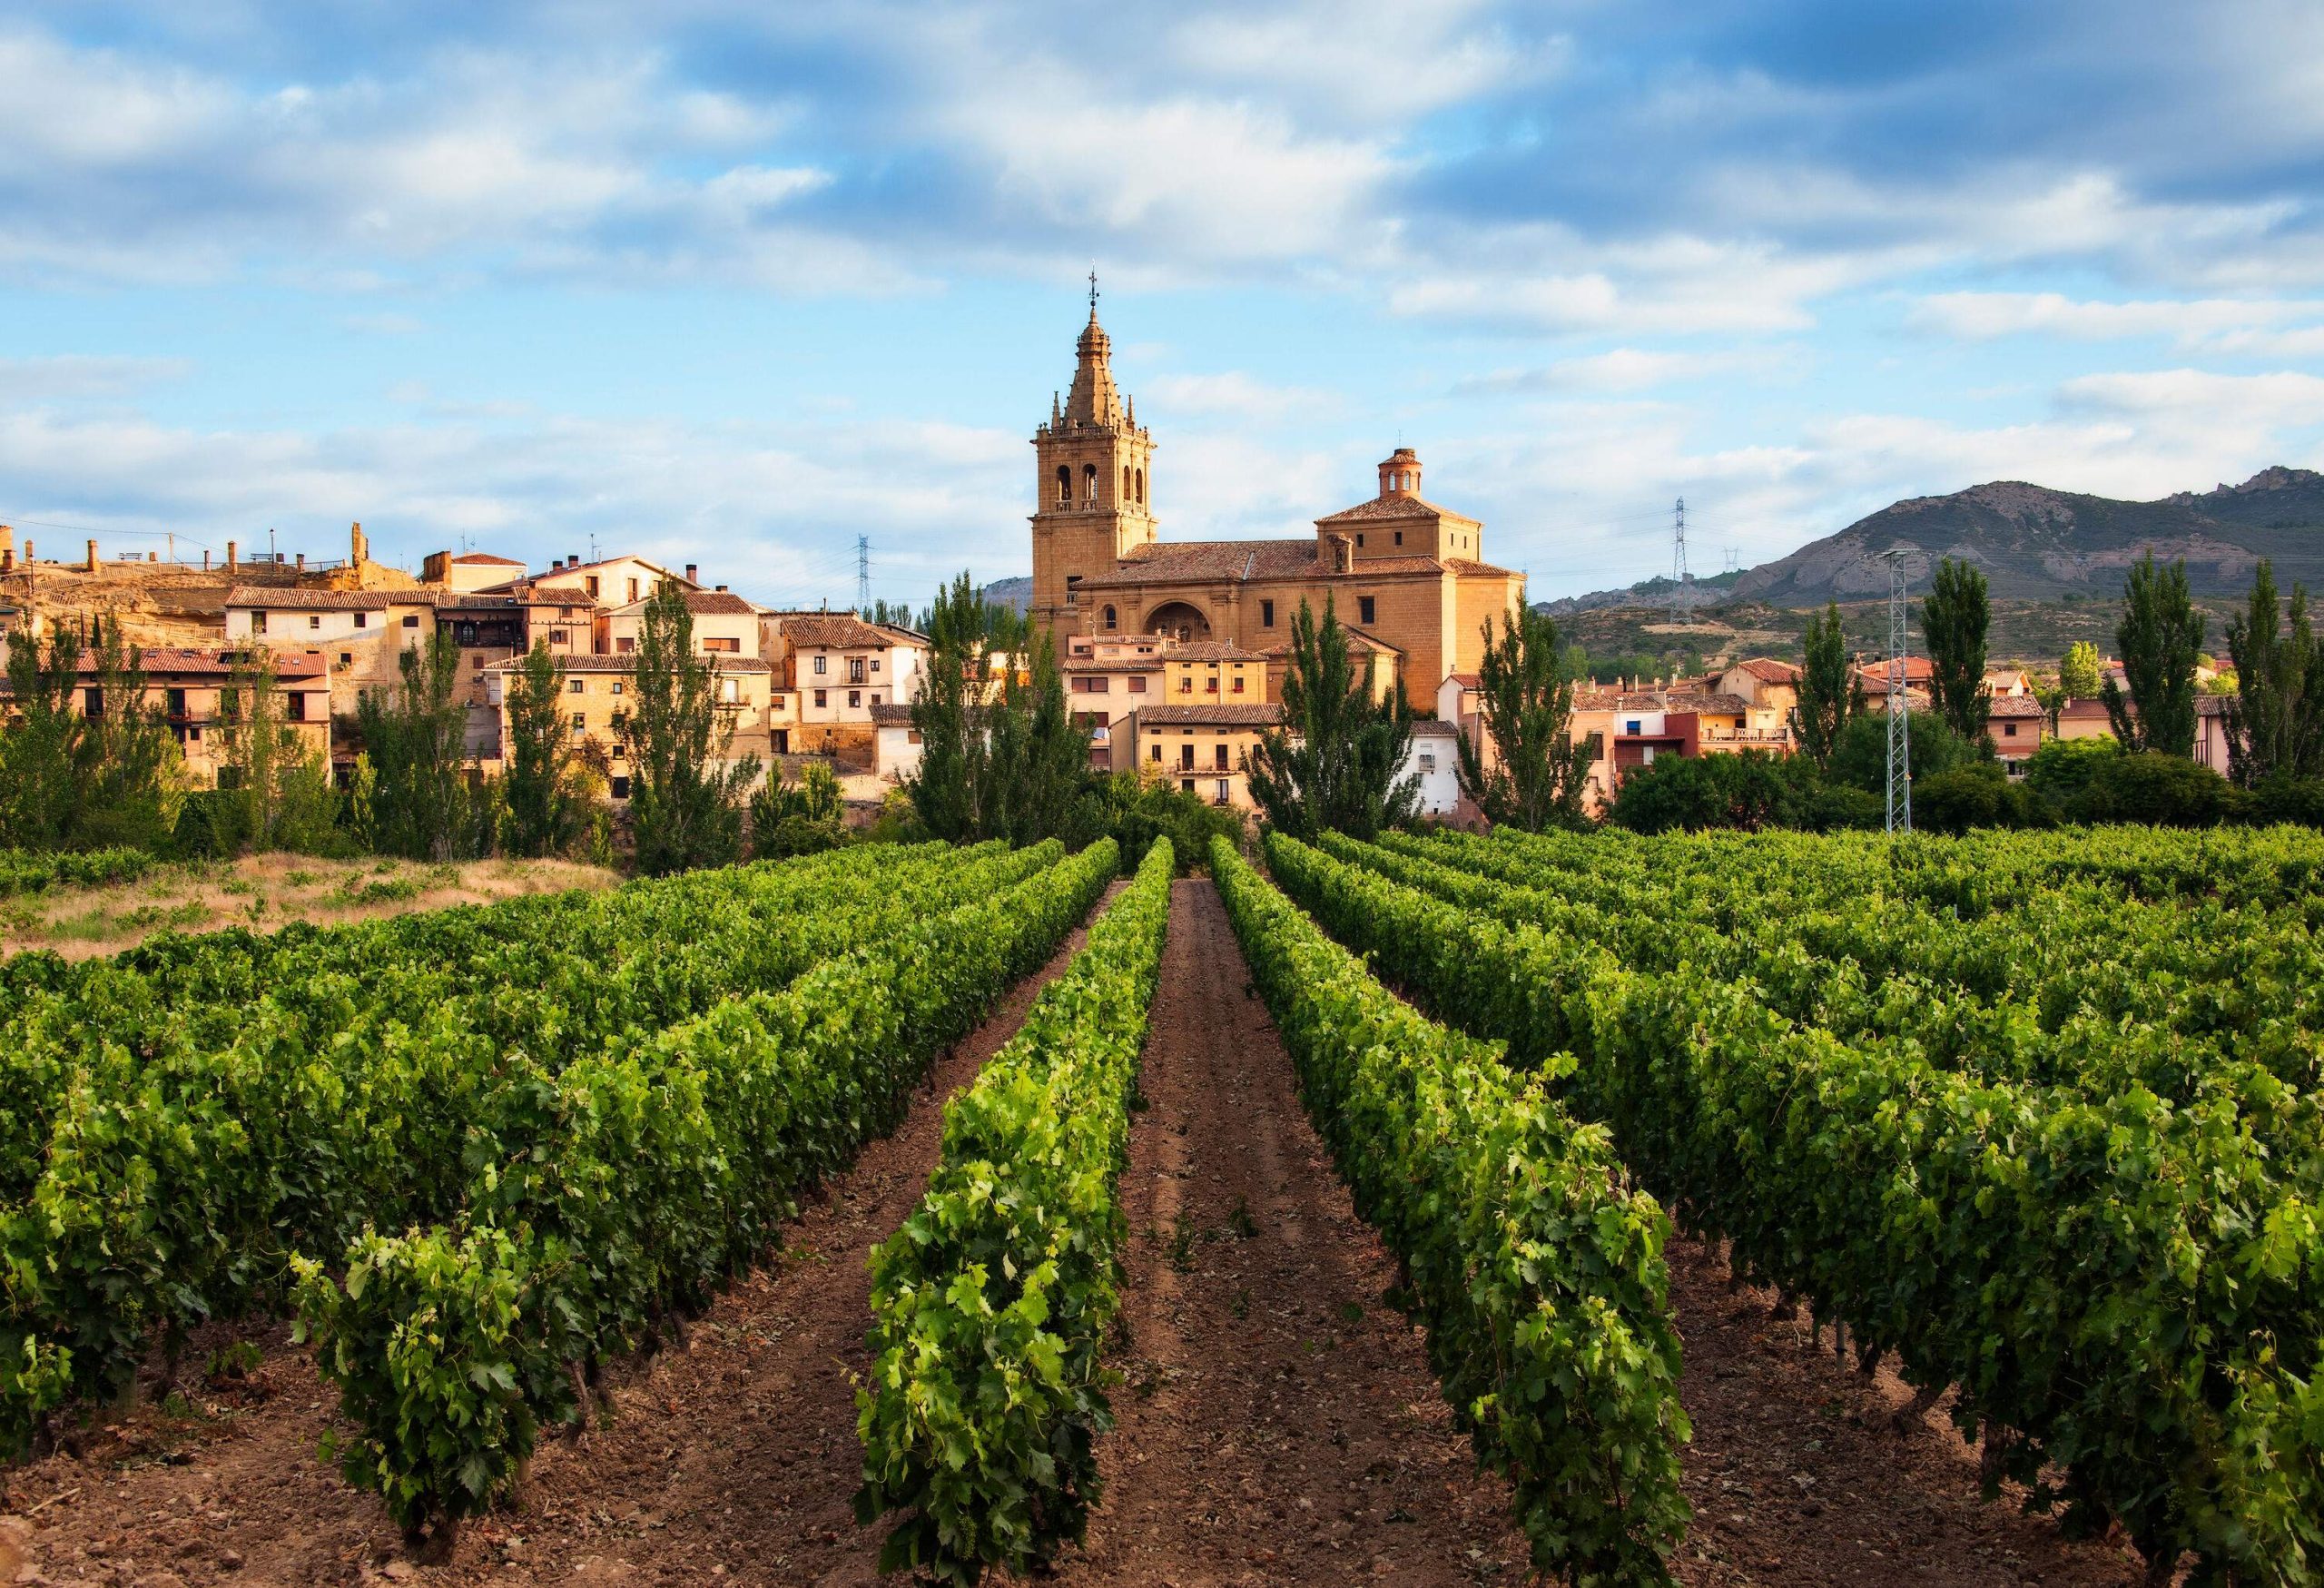 Rows of green plants and a view of a church in the centre among the classic houses and buildings of an old town.